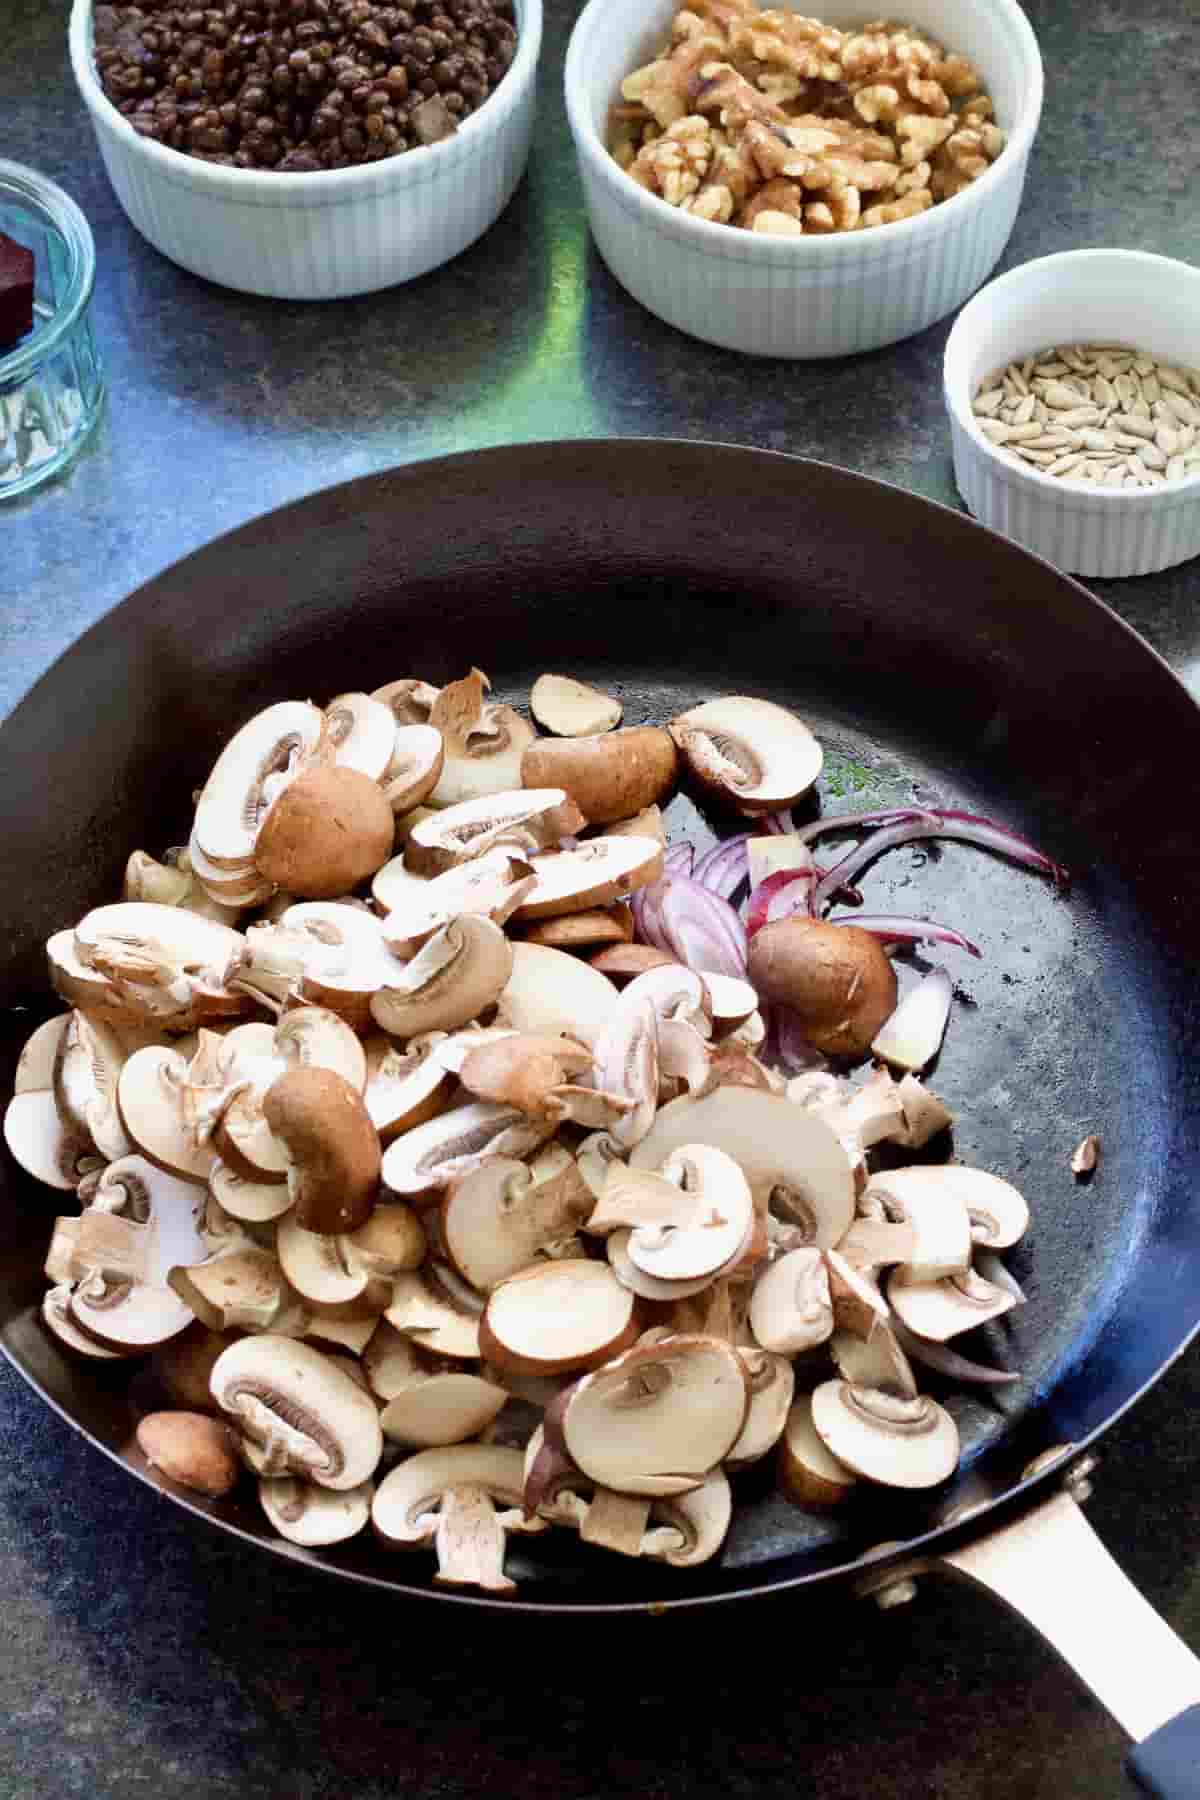 Mushrooms and sliced red onions in a frying pan.